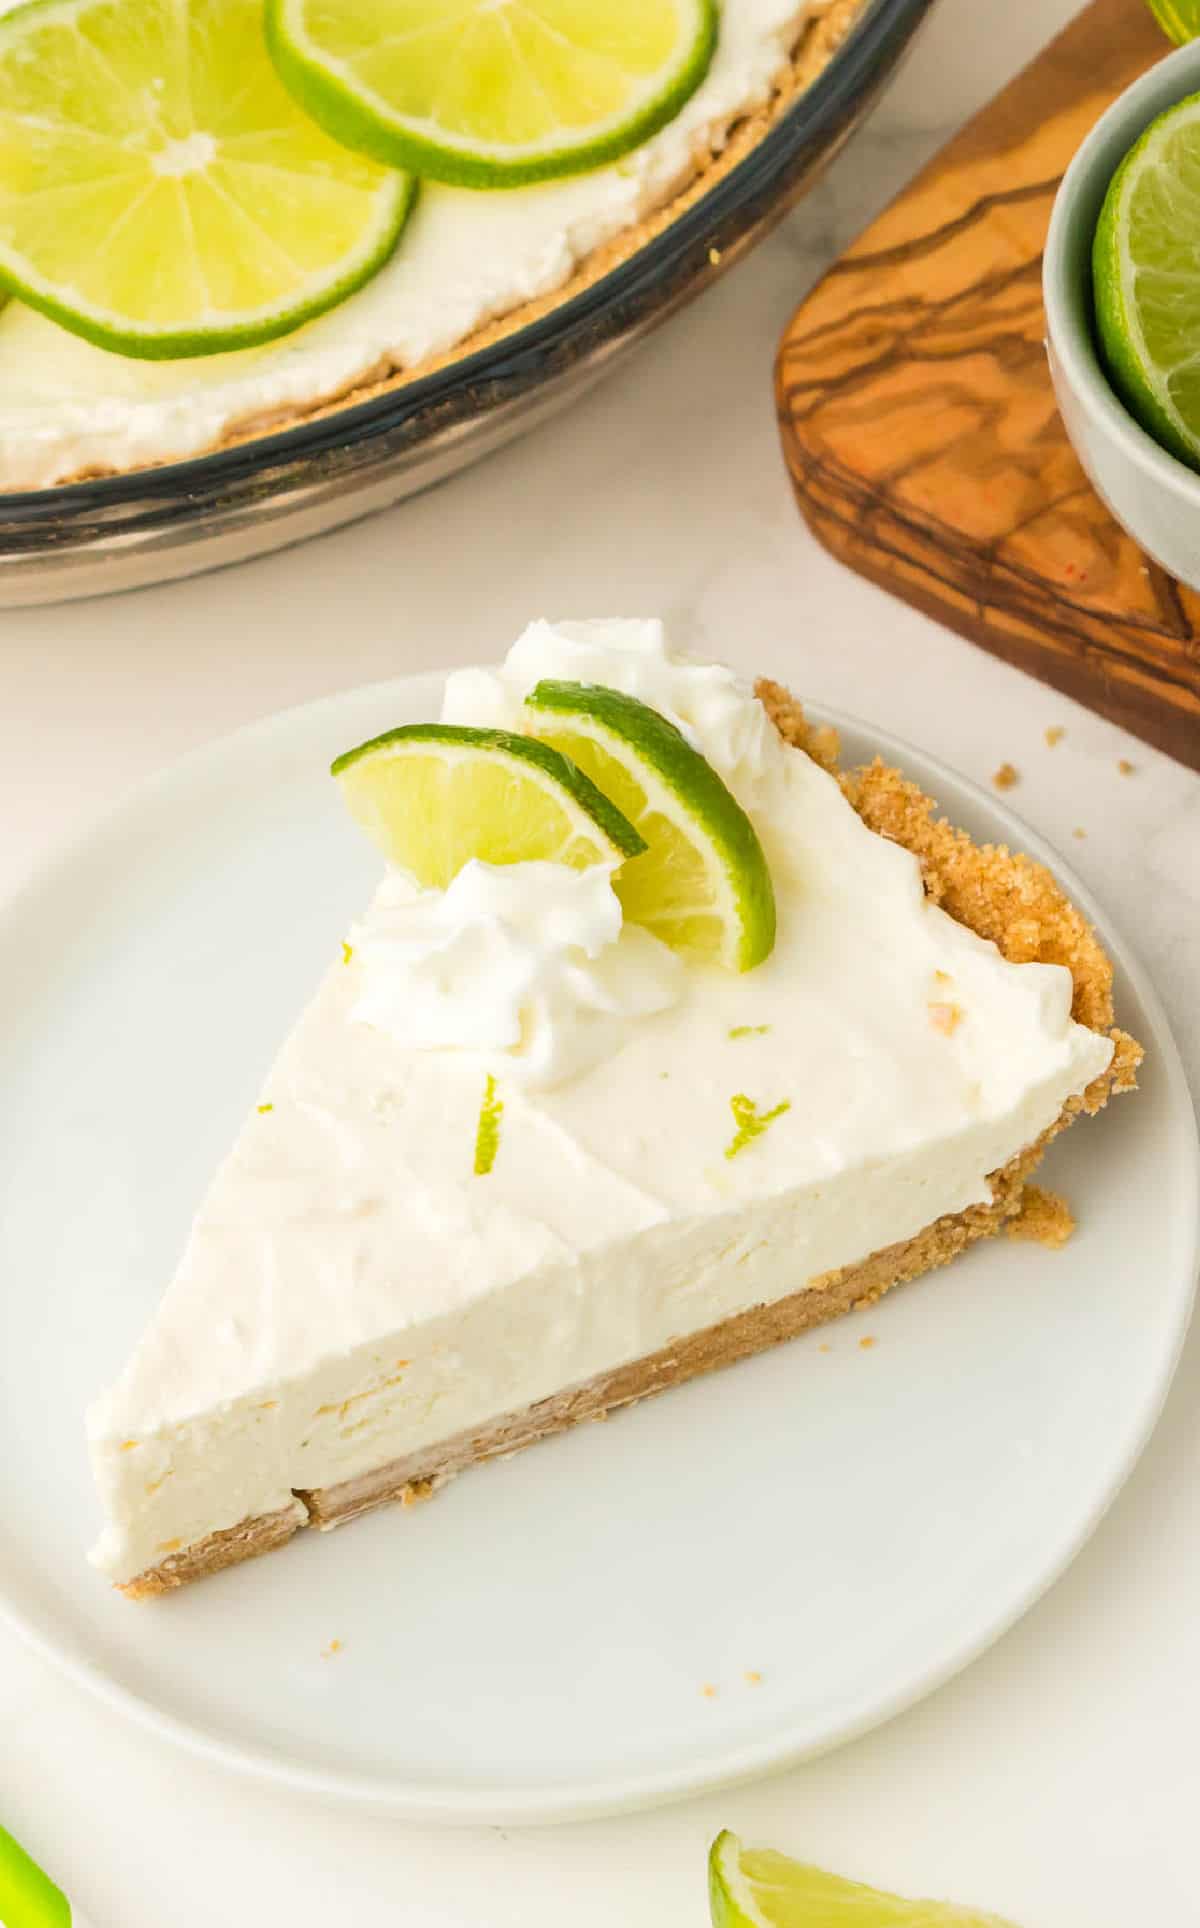 A slice of key lime pie on a white plate.